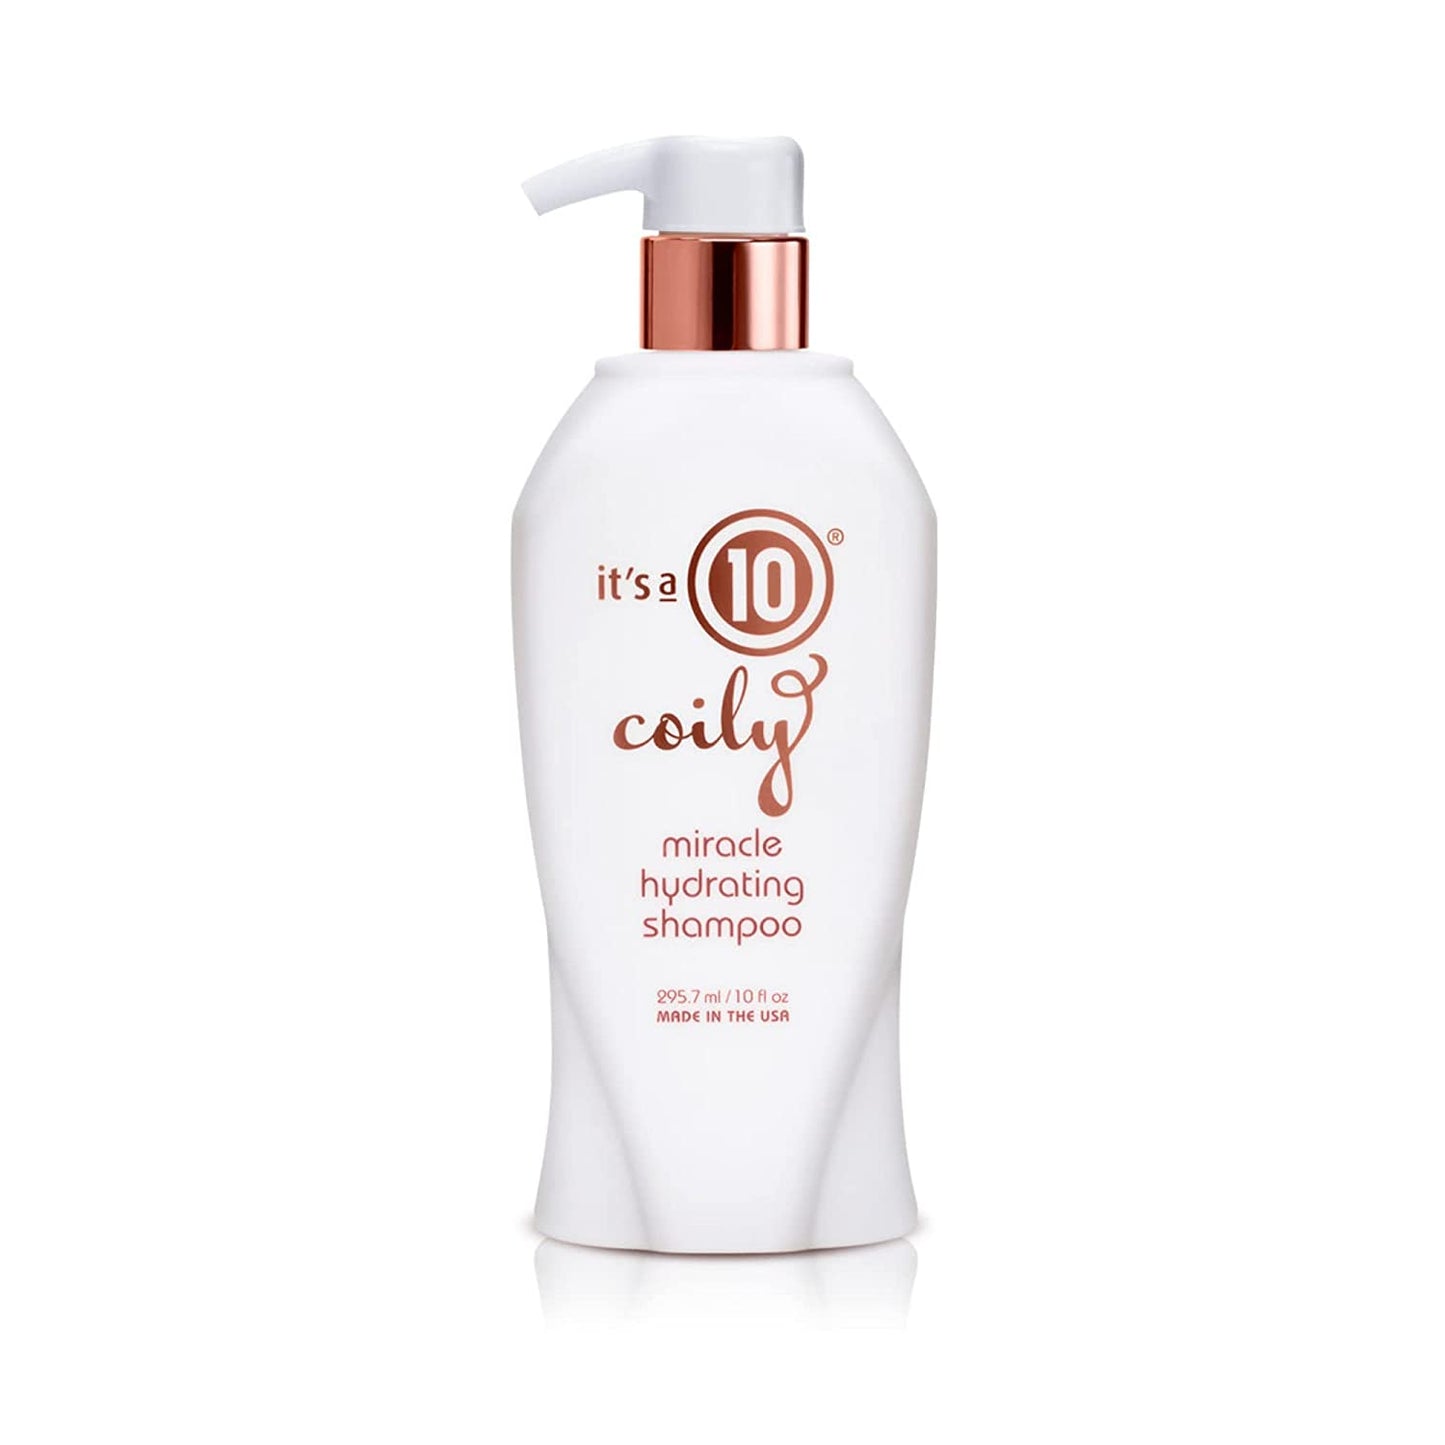 It's a 10 Haircare Miracle Coily Hydrating Shampoo 10 oz